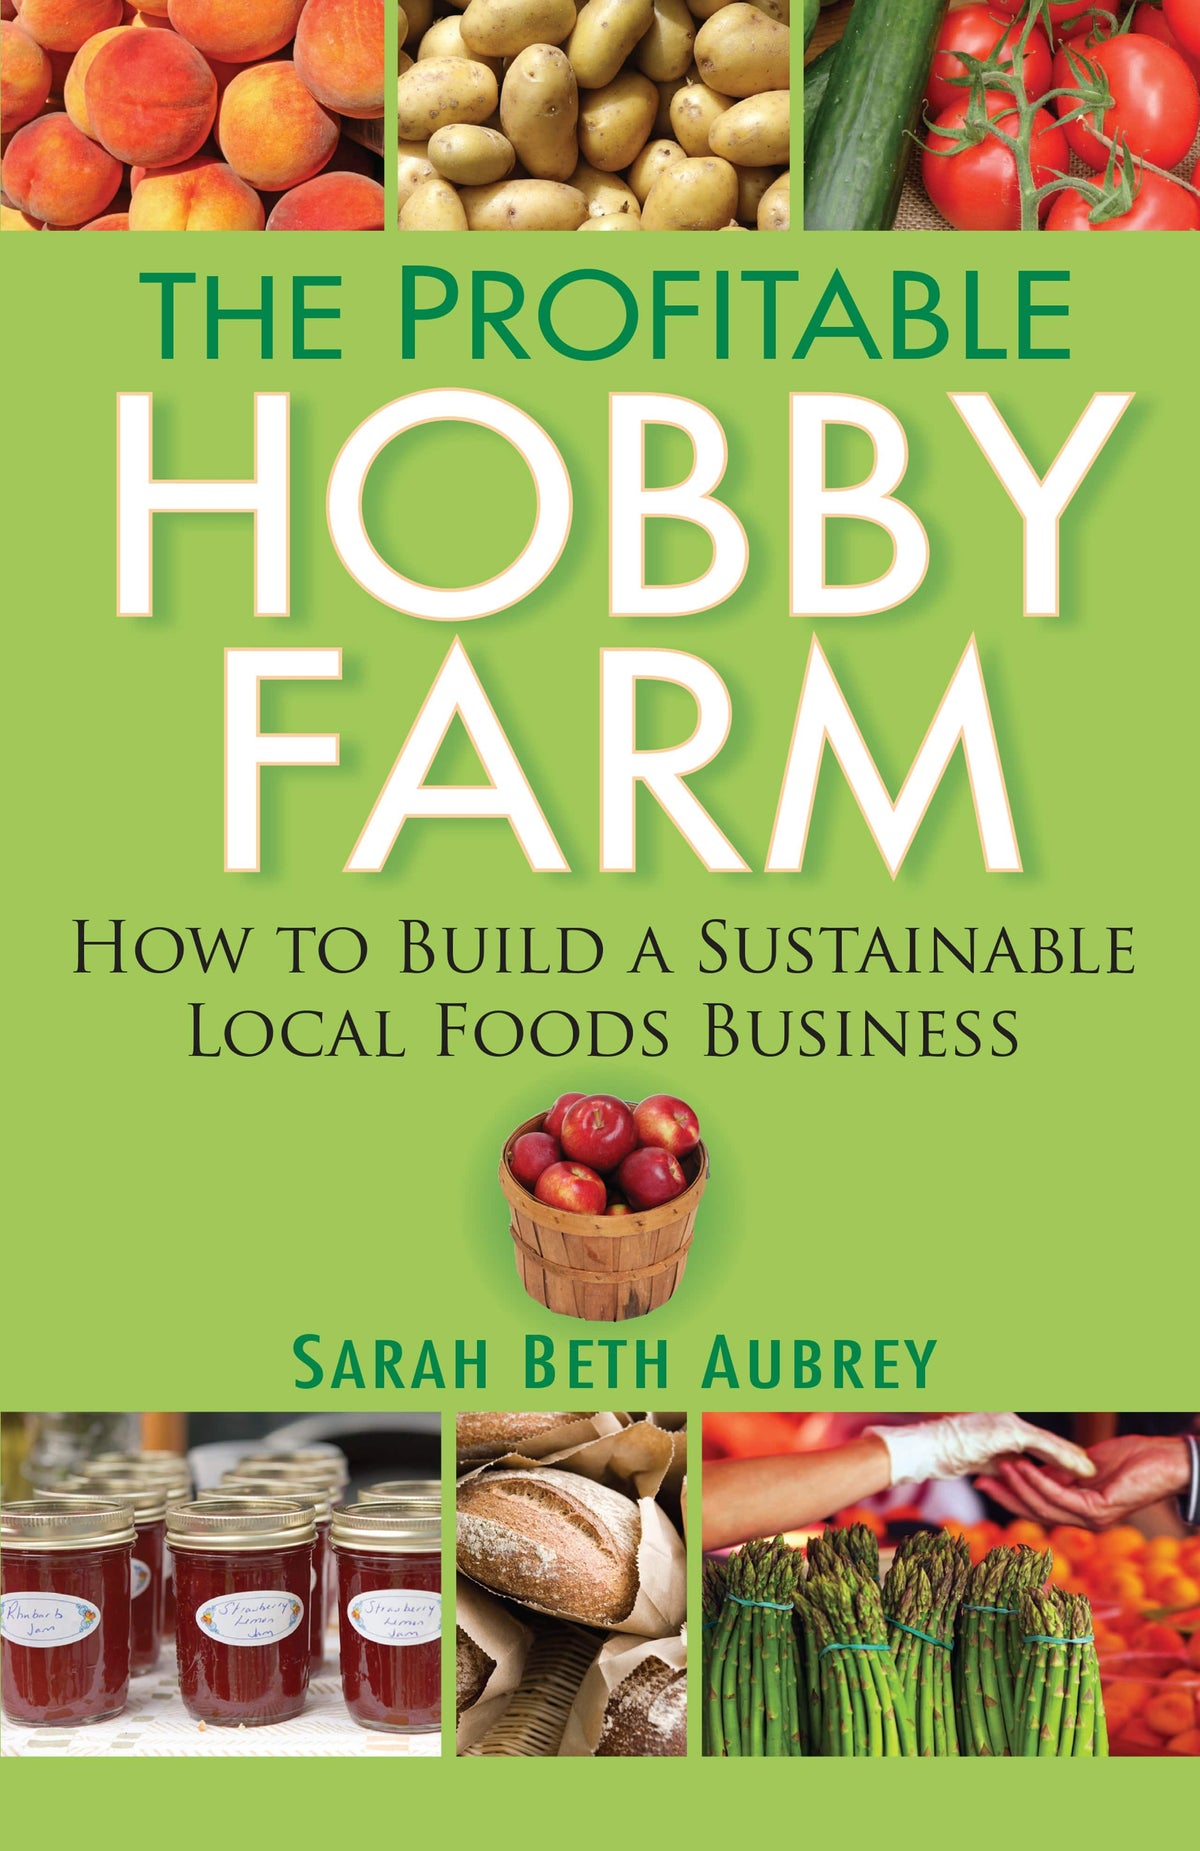 How to Start Your Hobby Farm